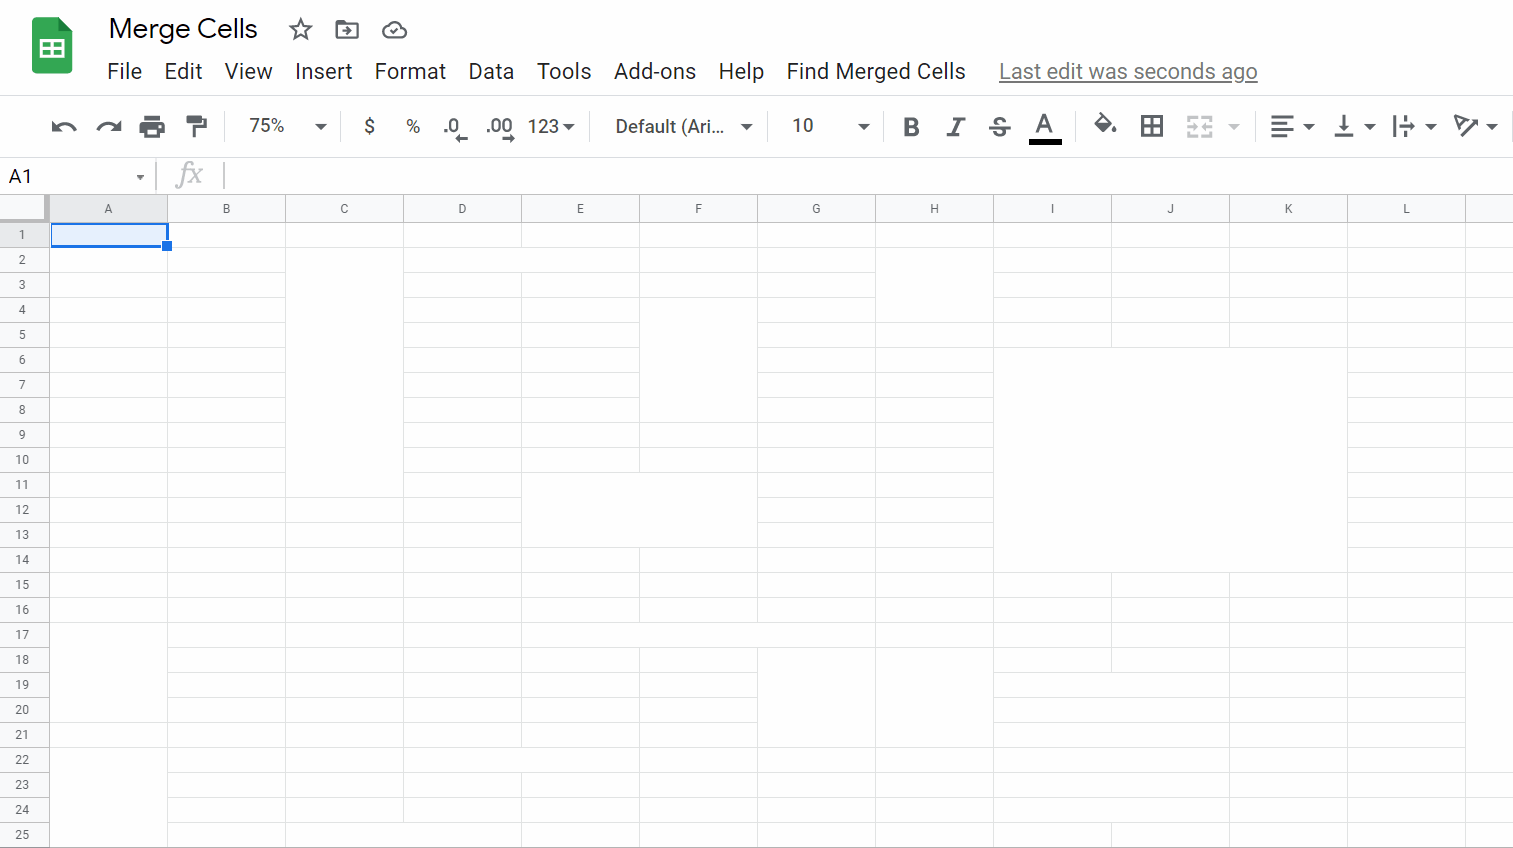 demonstration of how to find merged cells in google sheets by using the provided google apps script code